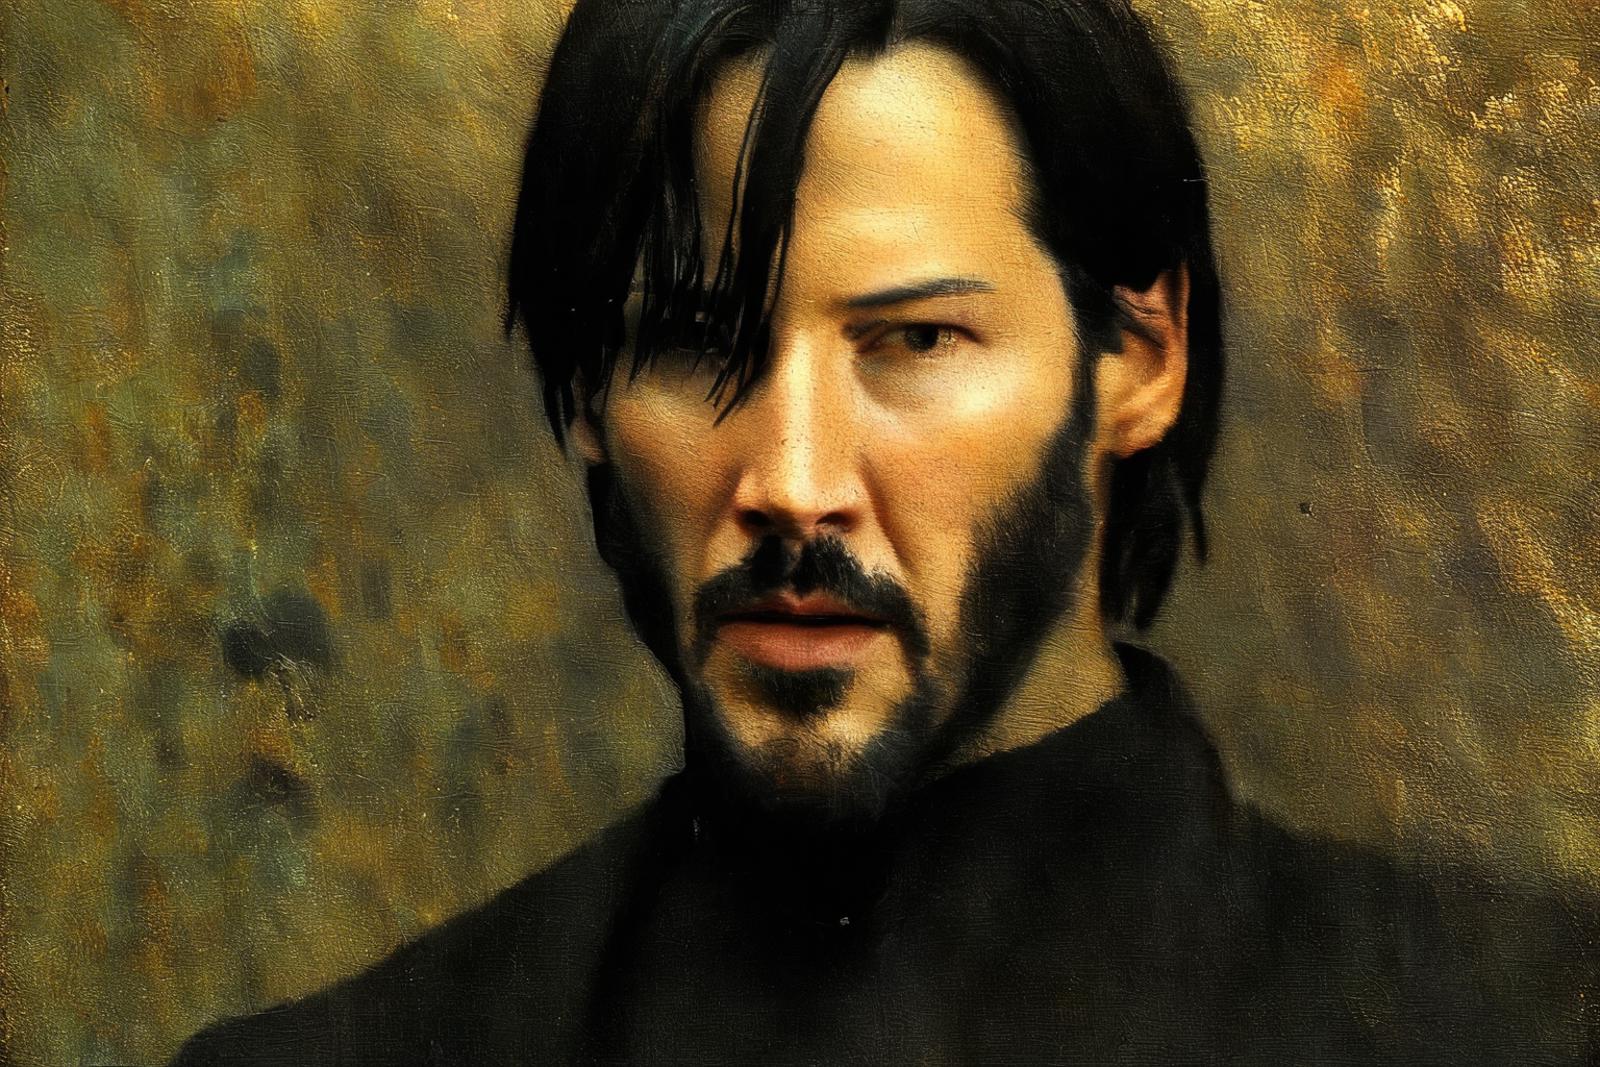 A painting of a man with a goatee and a mustache, wearing a black shirt.